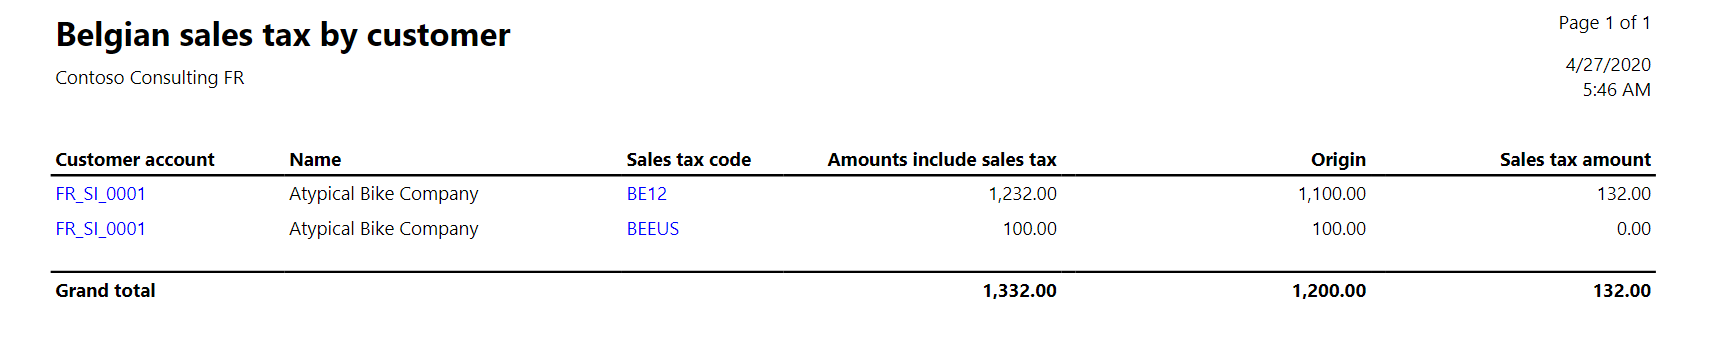 Belgian sales tax by customer generated report.